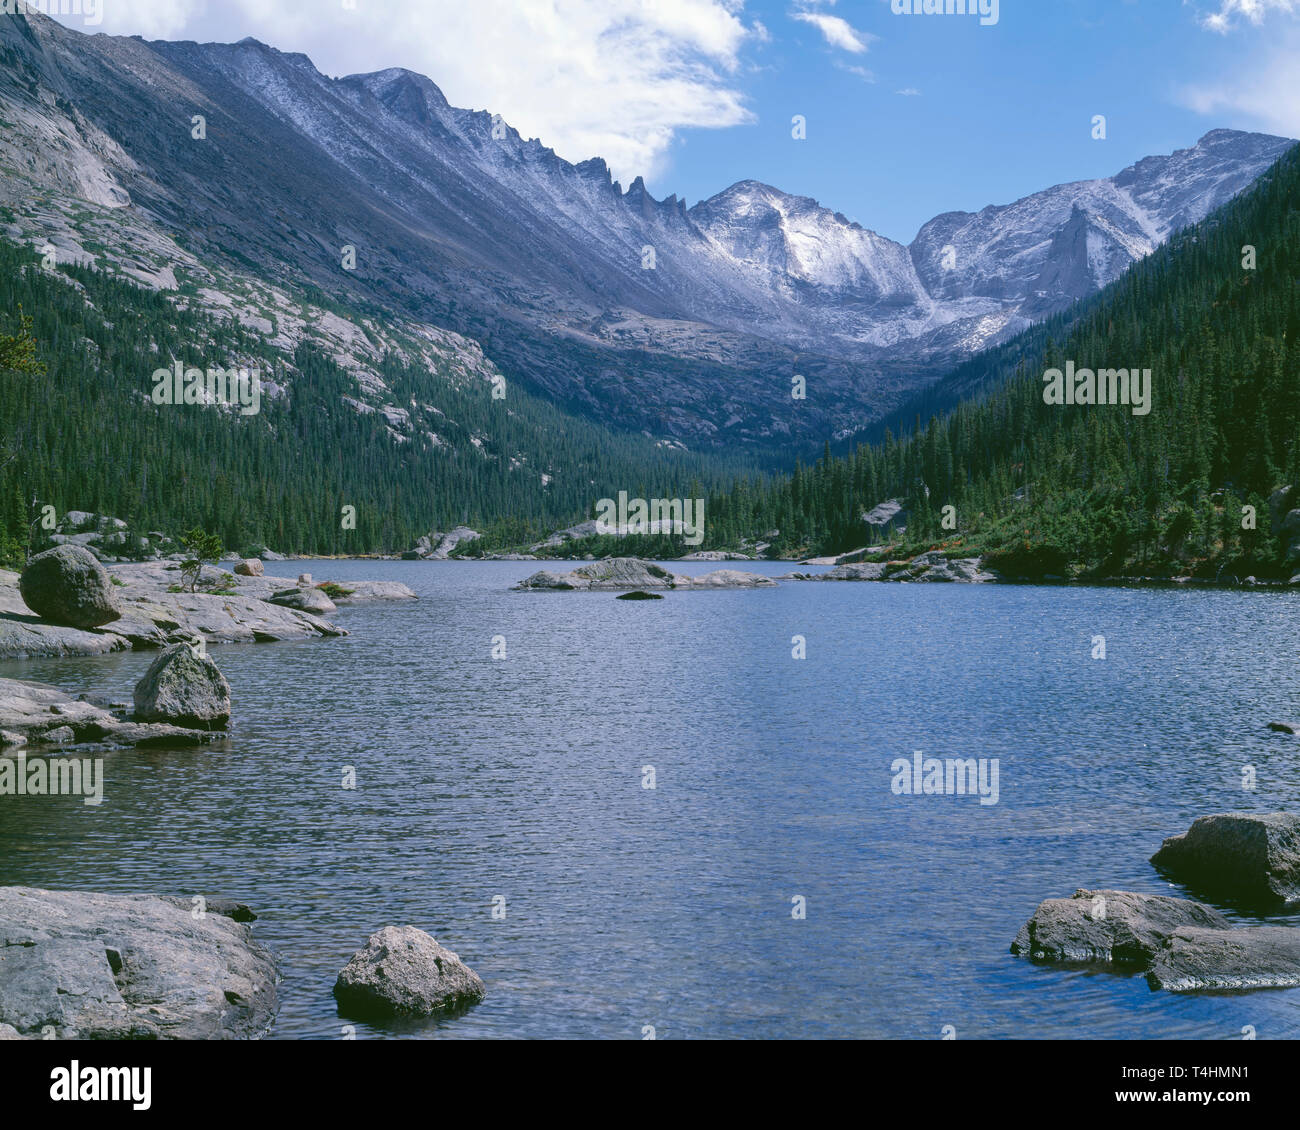 USA, Colorado, Rocky Mountain National Park, Early fall snow on peaks above Mills Lake including Longs Peak (upper left) and Pagoda Peak (center). Stock Photo